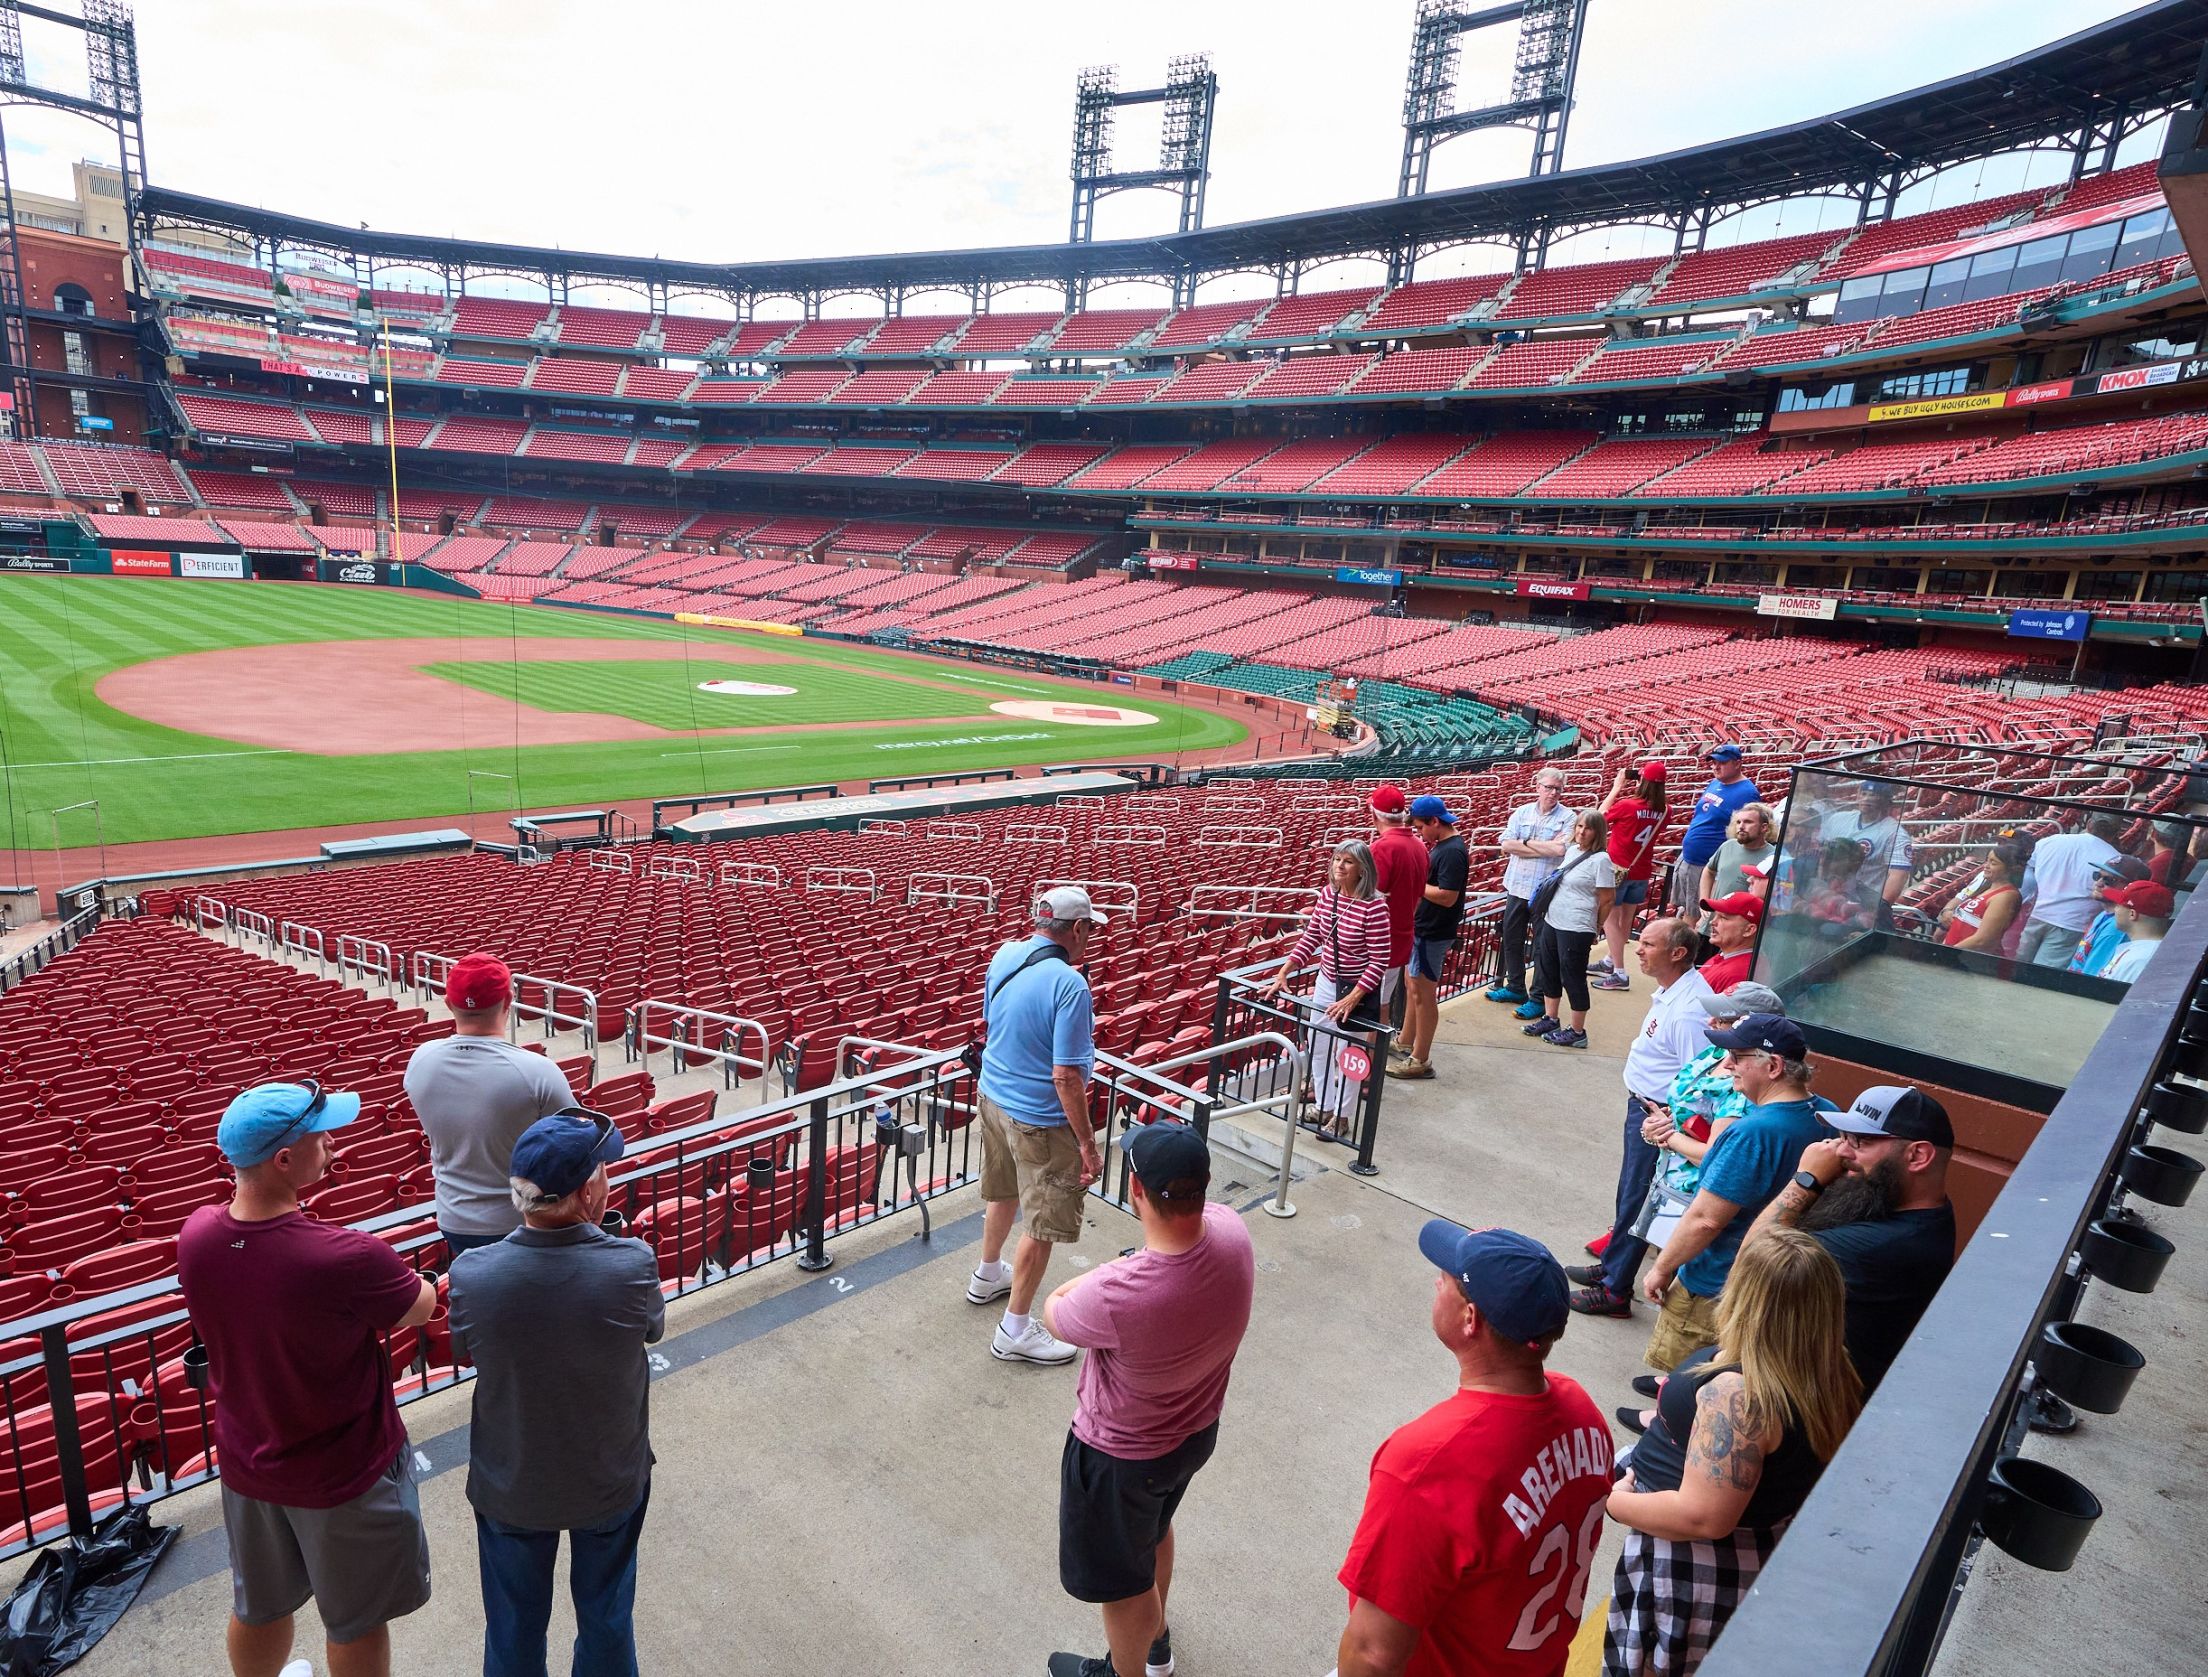 Information and details for watching a game at Busch Stadium